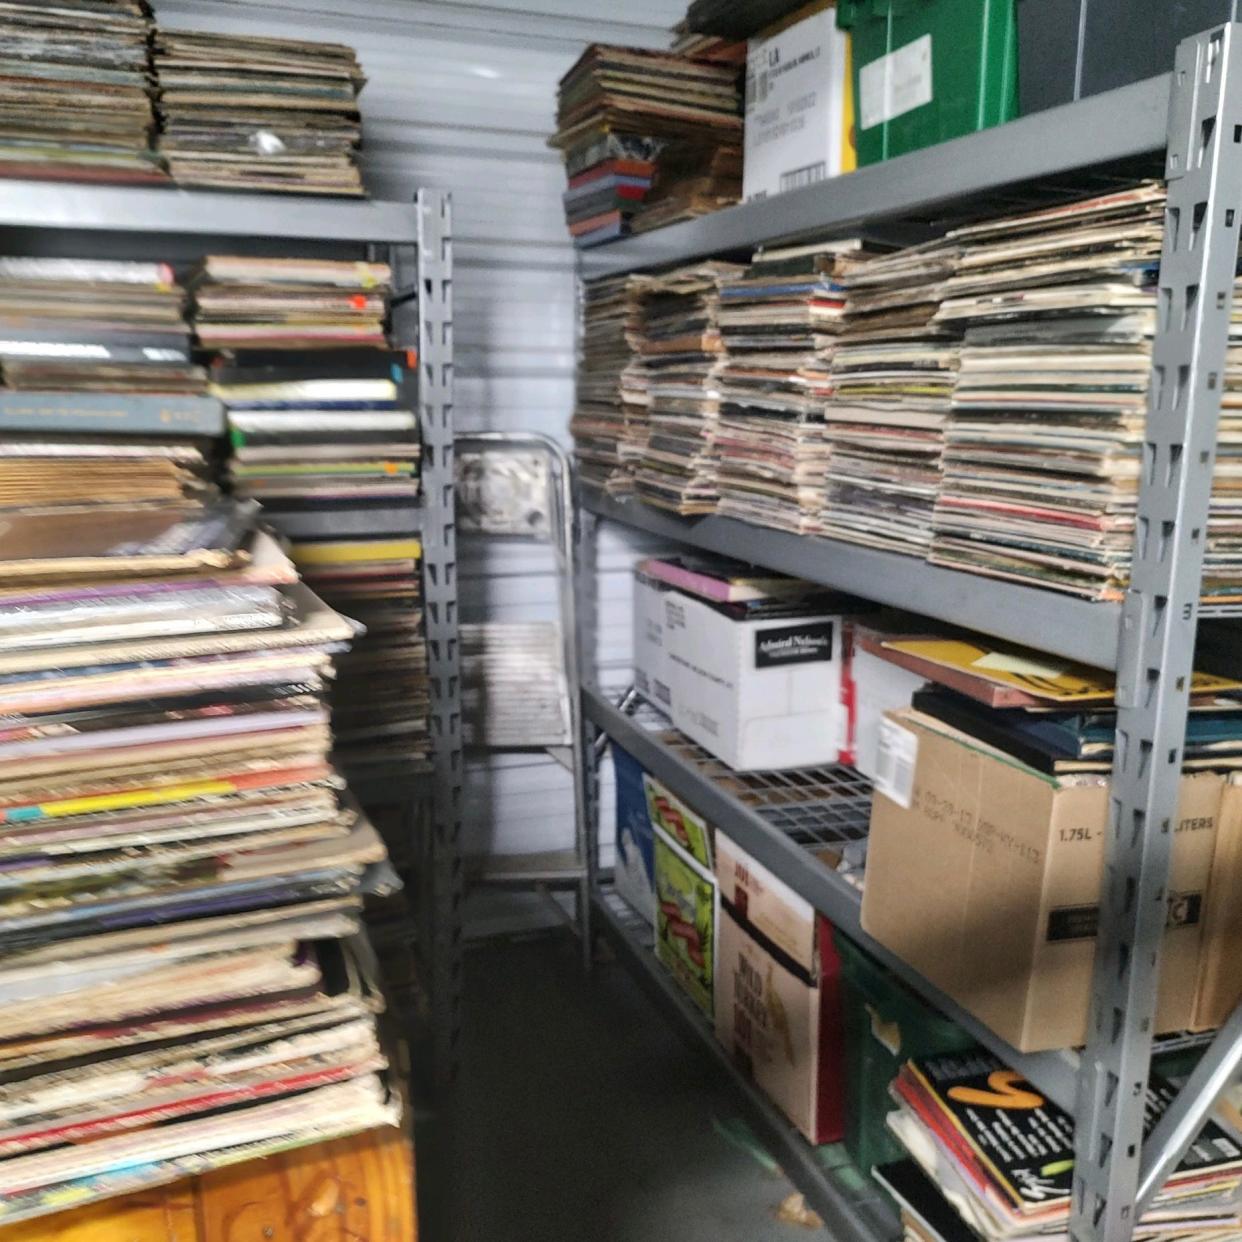 The 10,000 vinyl sale with the Community Thrift Market will be held from Friday, June 16 to Sunday, June 18.